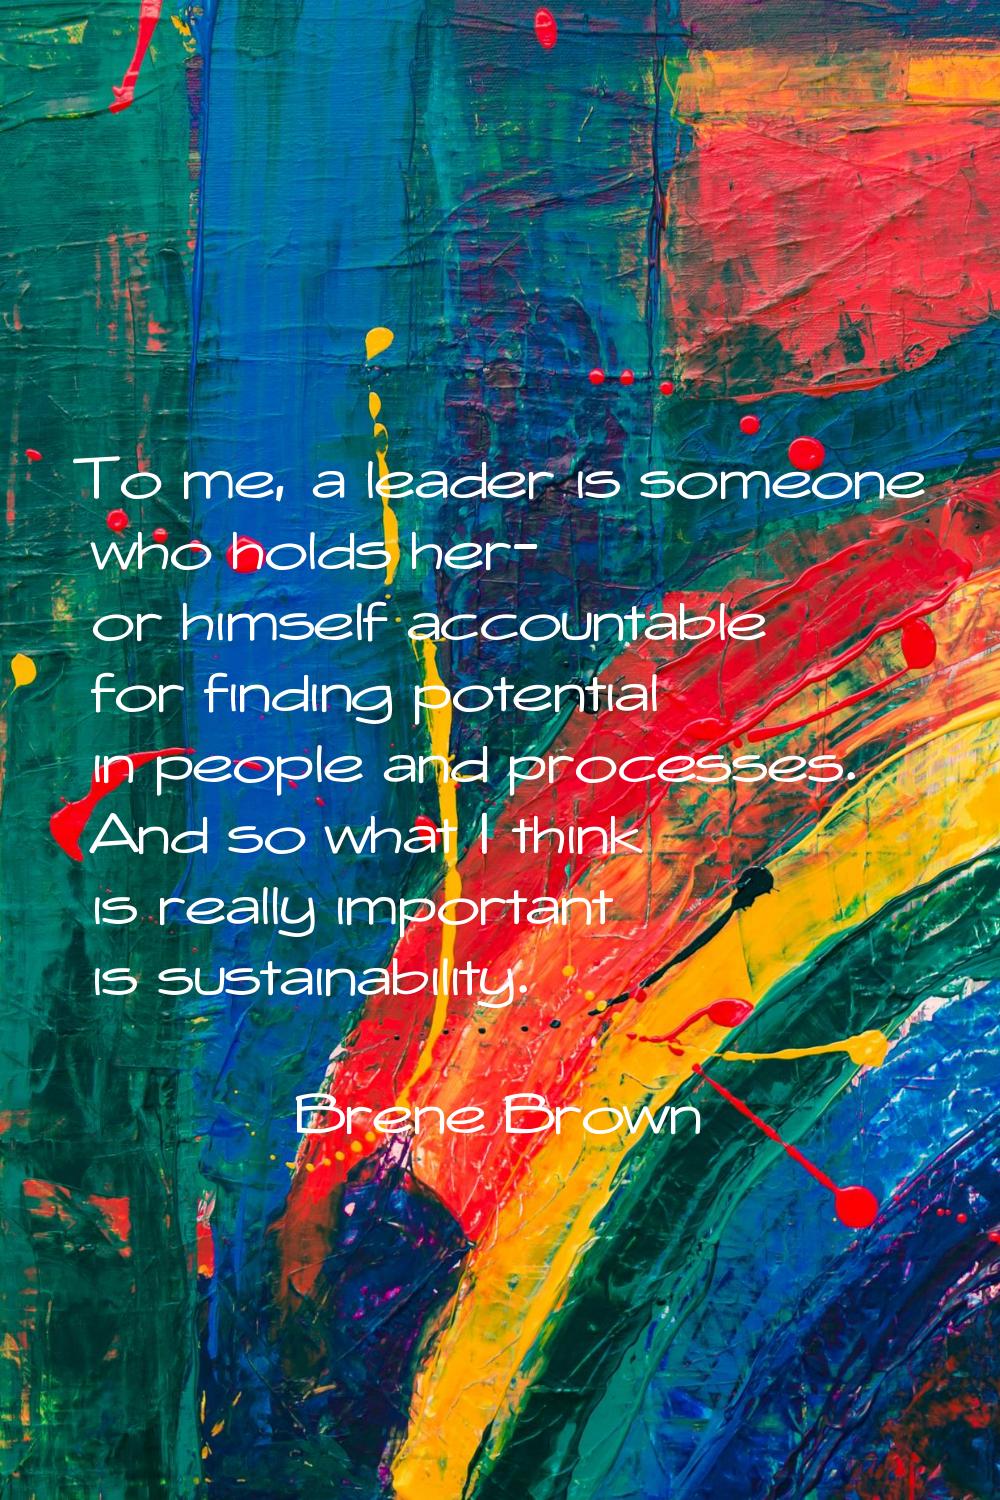 To me, a leader is someone who holds her- or himself accountable for finding potential in people an